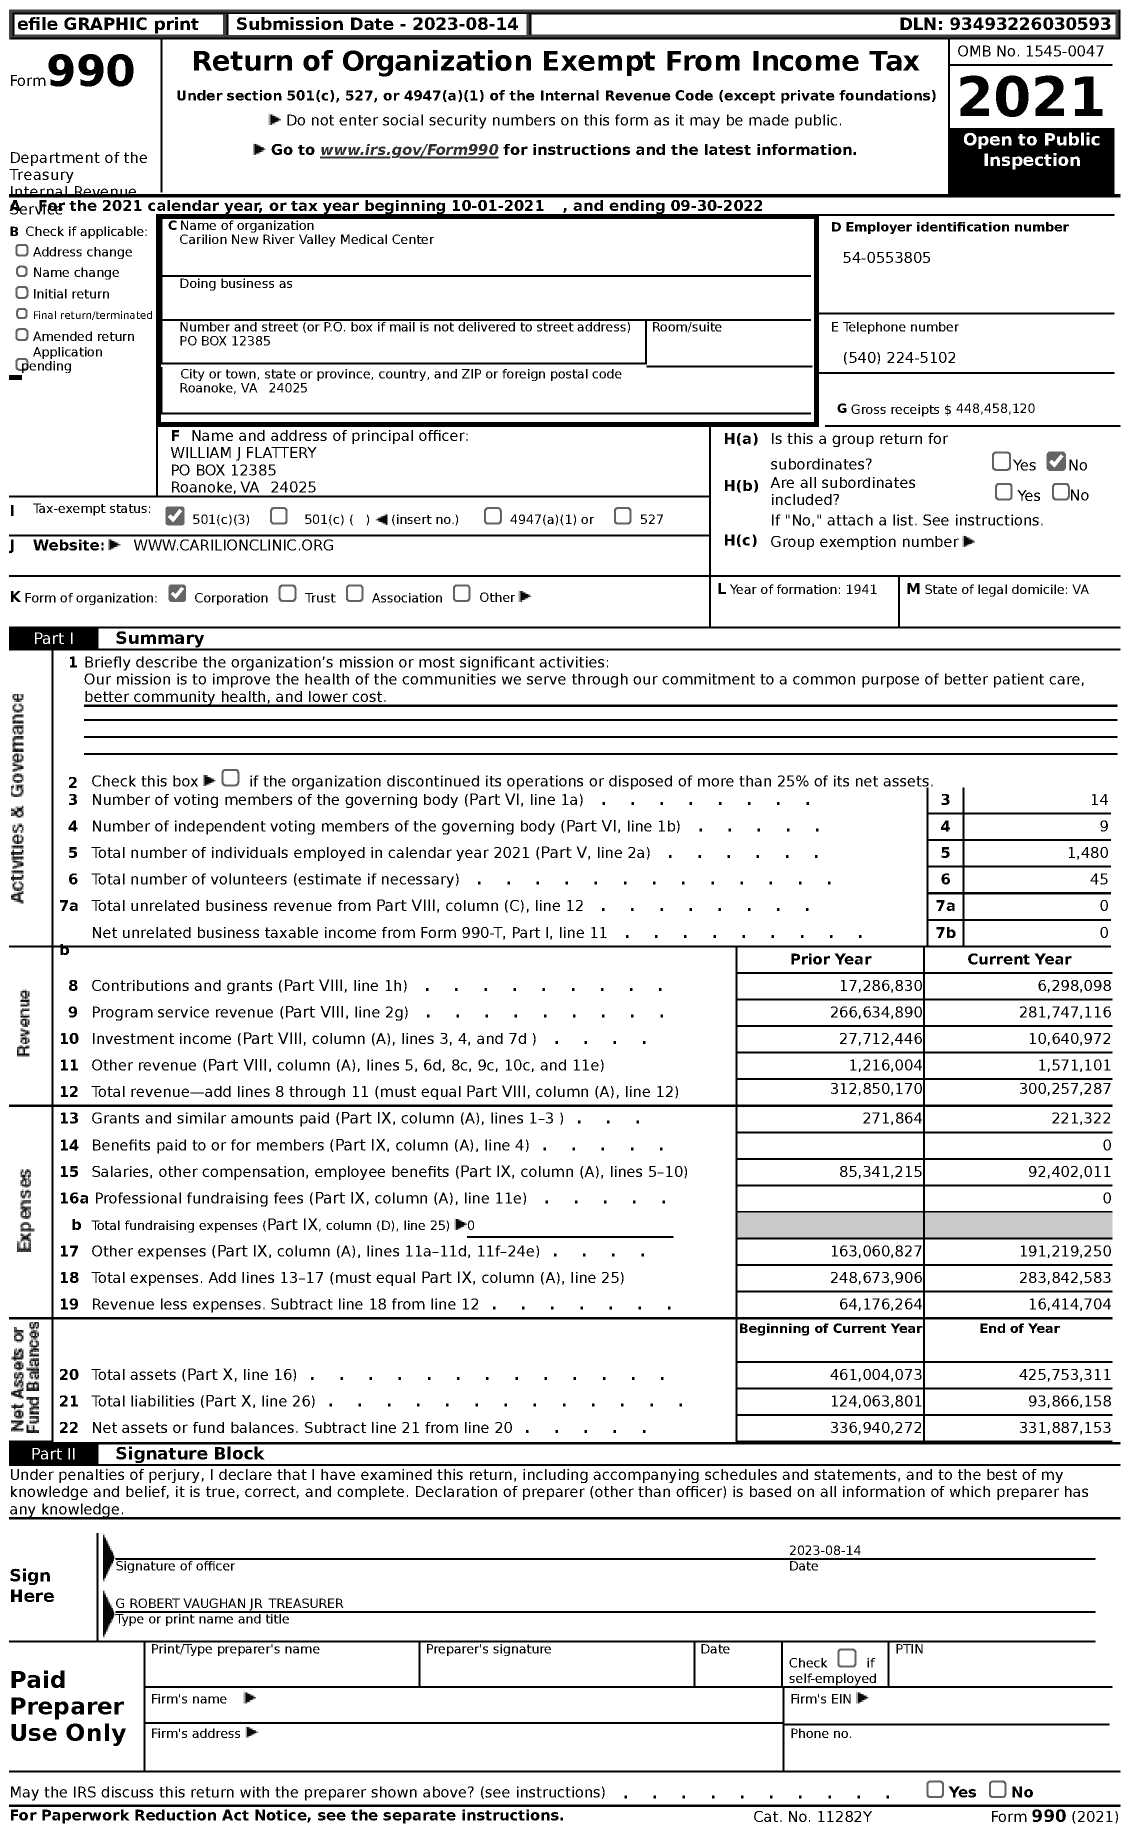 Image of first page of 2021 Form 990 for Carilion New River Valley Medical Center (CNRV)